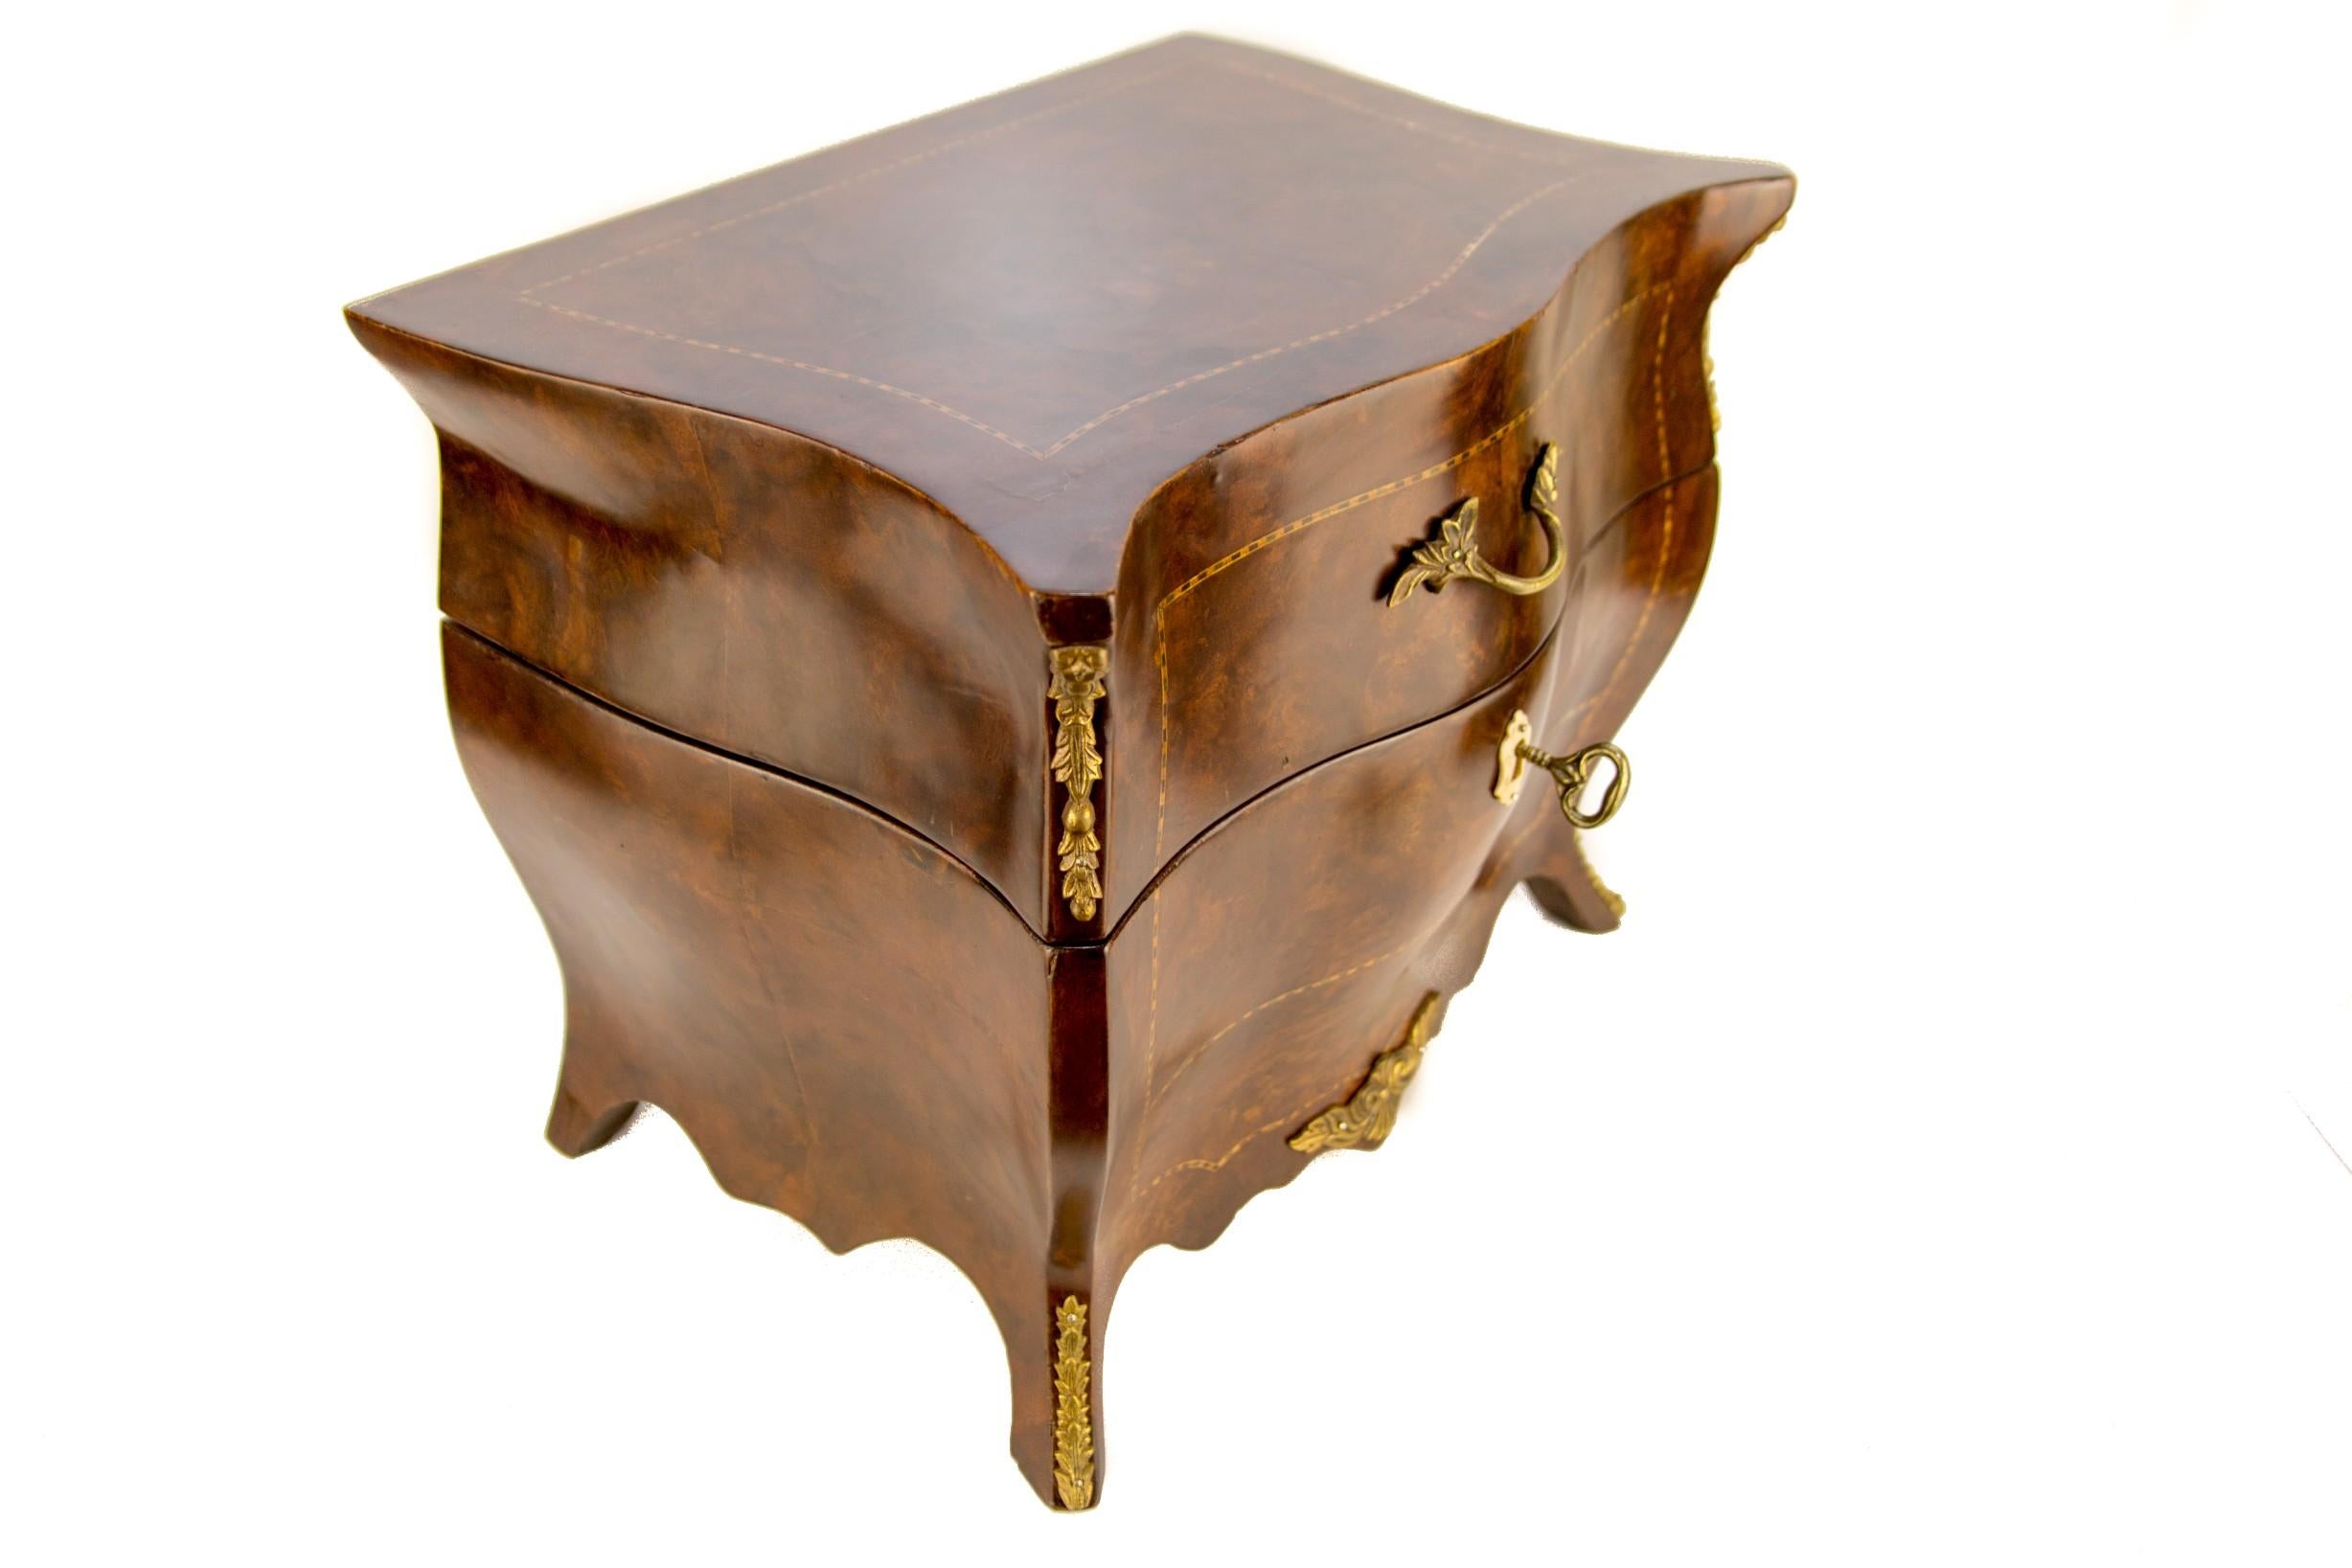 Elegant Liquor Cabinet or Tantalus / Cave à liqueur circa the 1920s, made of precious wood veneers and marquetry, bronze decors.
Set contains a removable wooden insert with bronze lift handle; 4 decanters with stoppers, 16 liqueur